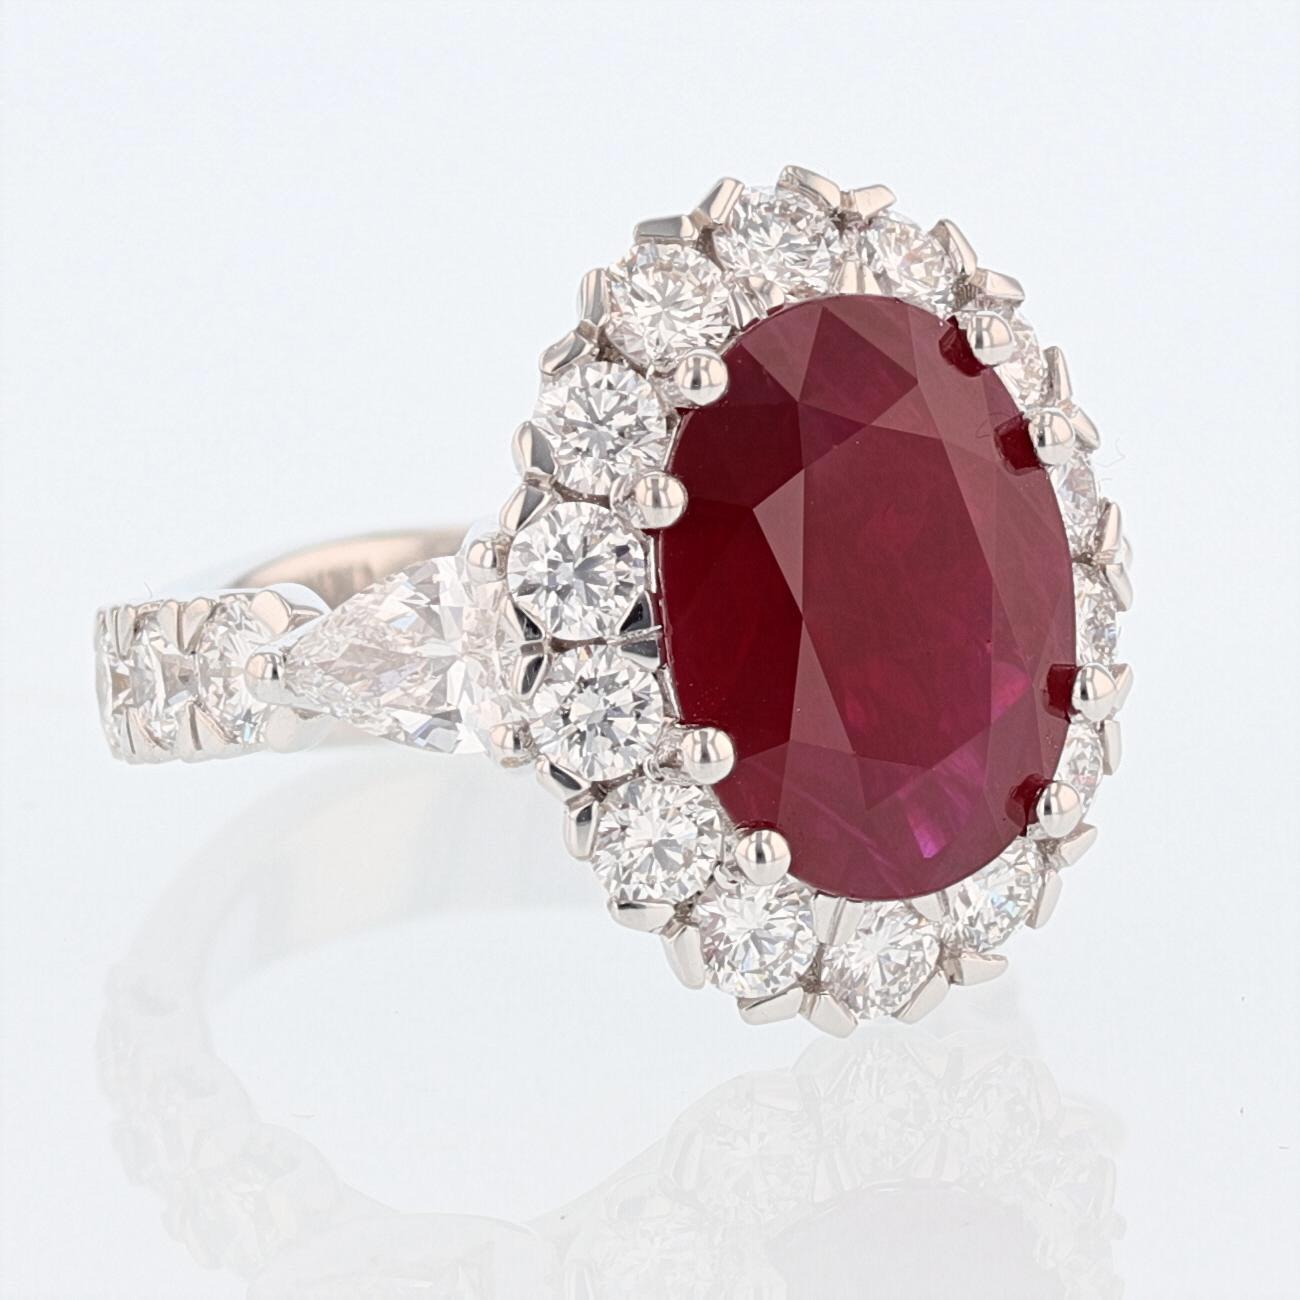 This ring is made in 18k white gold and features a 6.75 ct Burmese ruby with a GRS certificate. The certificate number is 